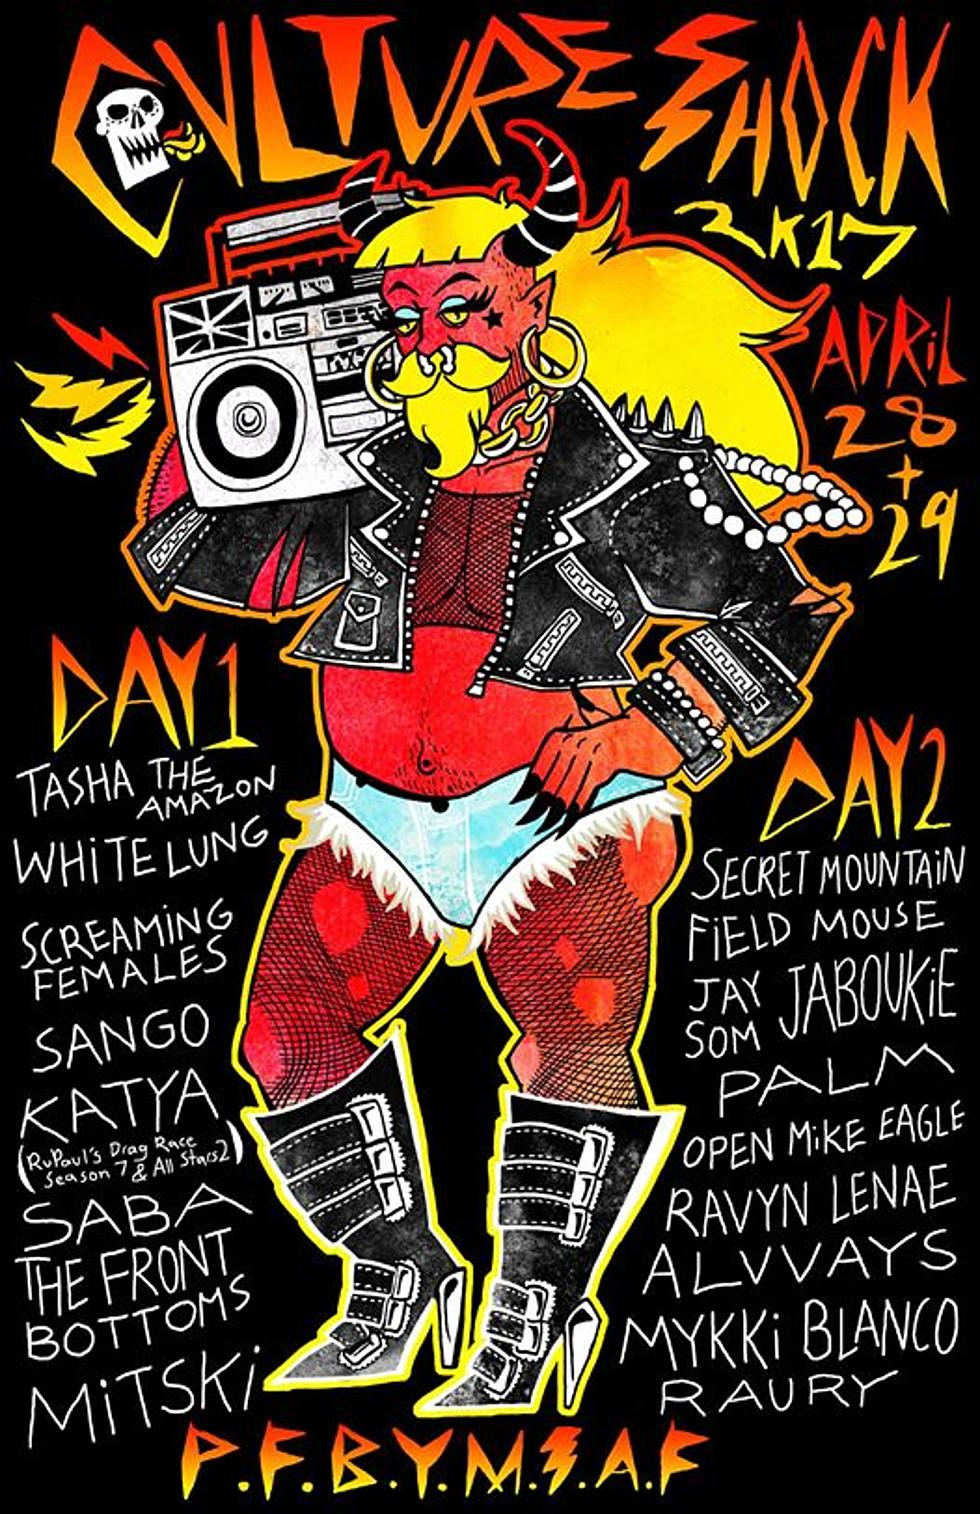 SUNY Purchase Culture Shock 2017 lineup (Mitski, Front Bottoms, Mykki Blanco, White Lung, Jay Som, Saba, more)